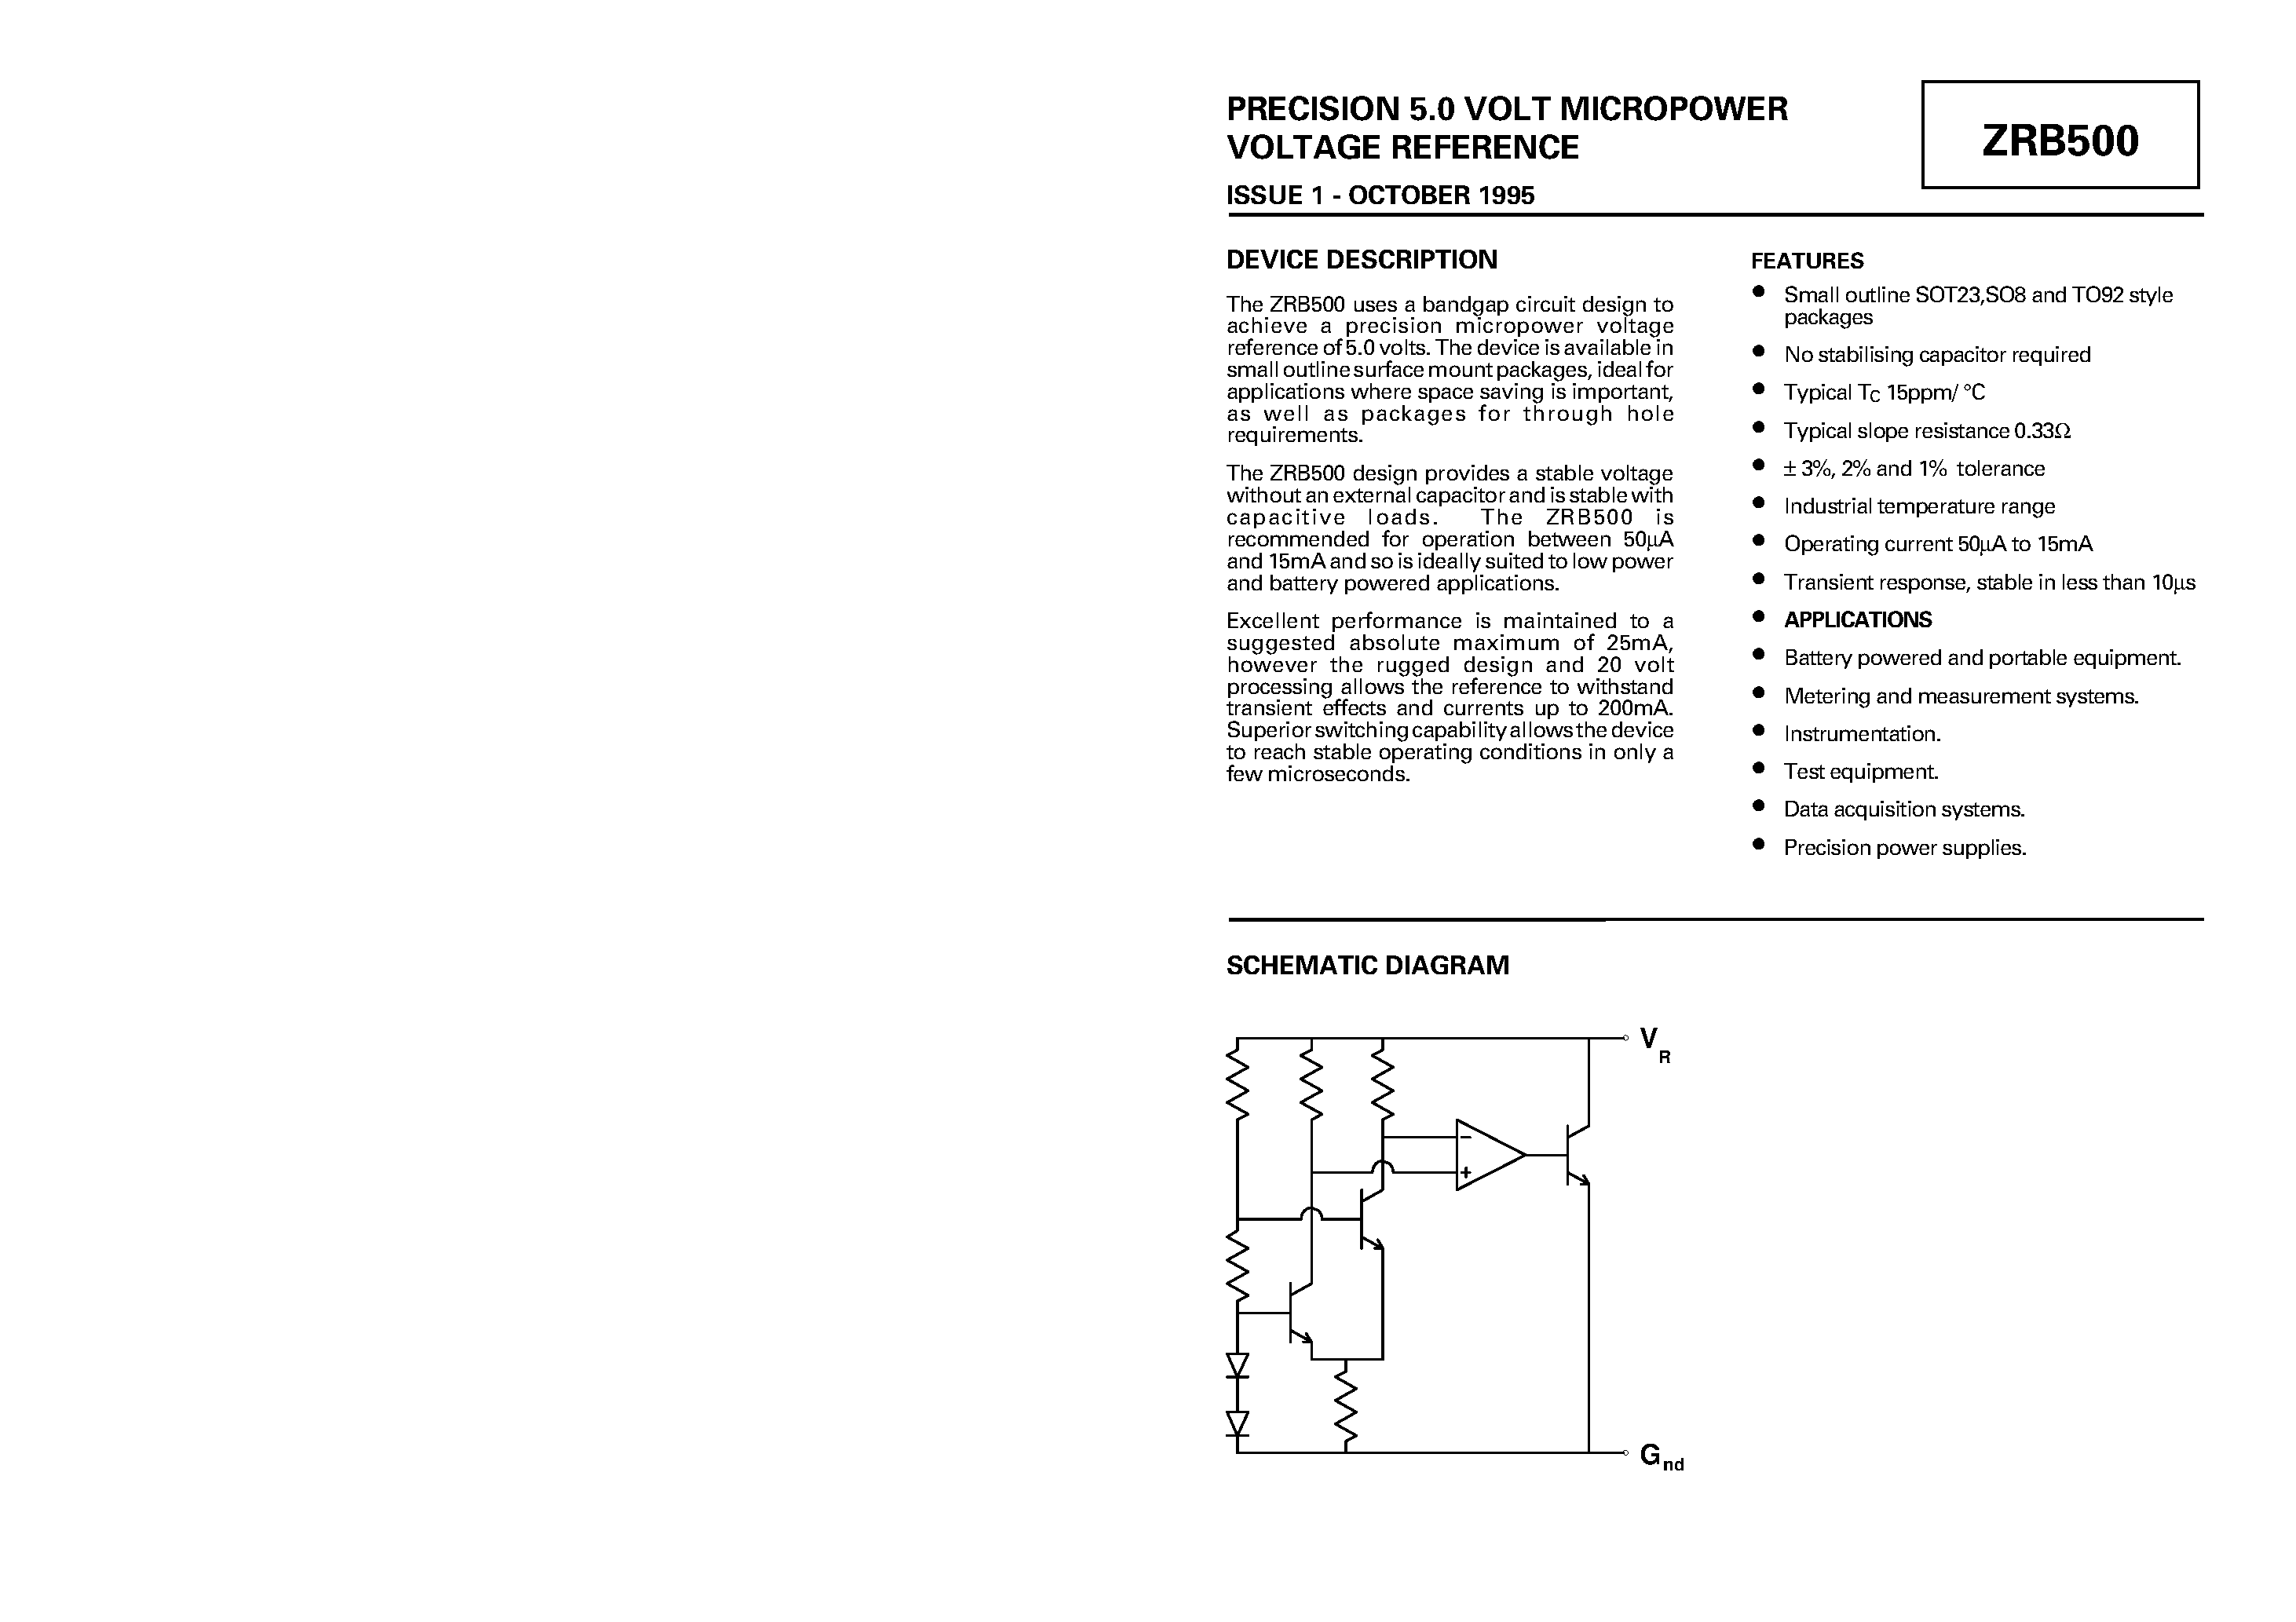 Datasheet ZRB500 - PRECISION 5.0 VOLT MICROPOWER VOLTAGE REFERENCE page 1